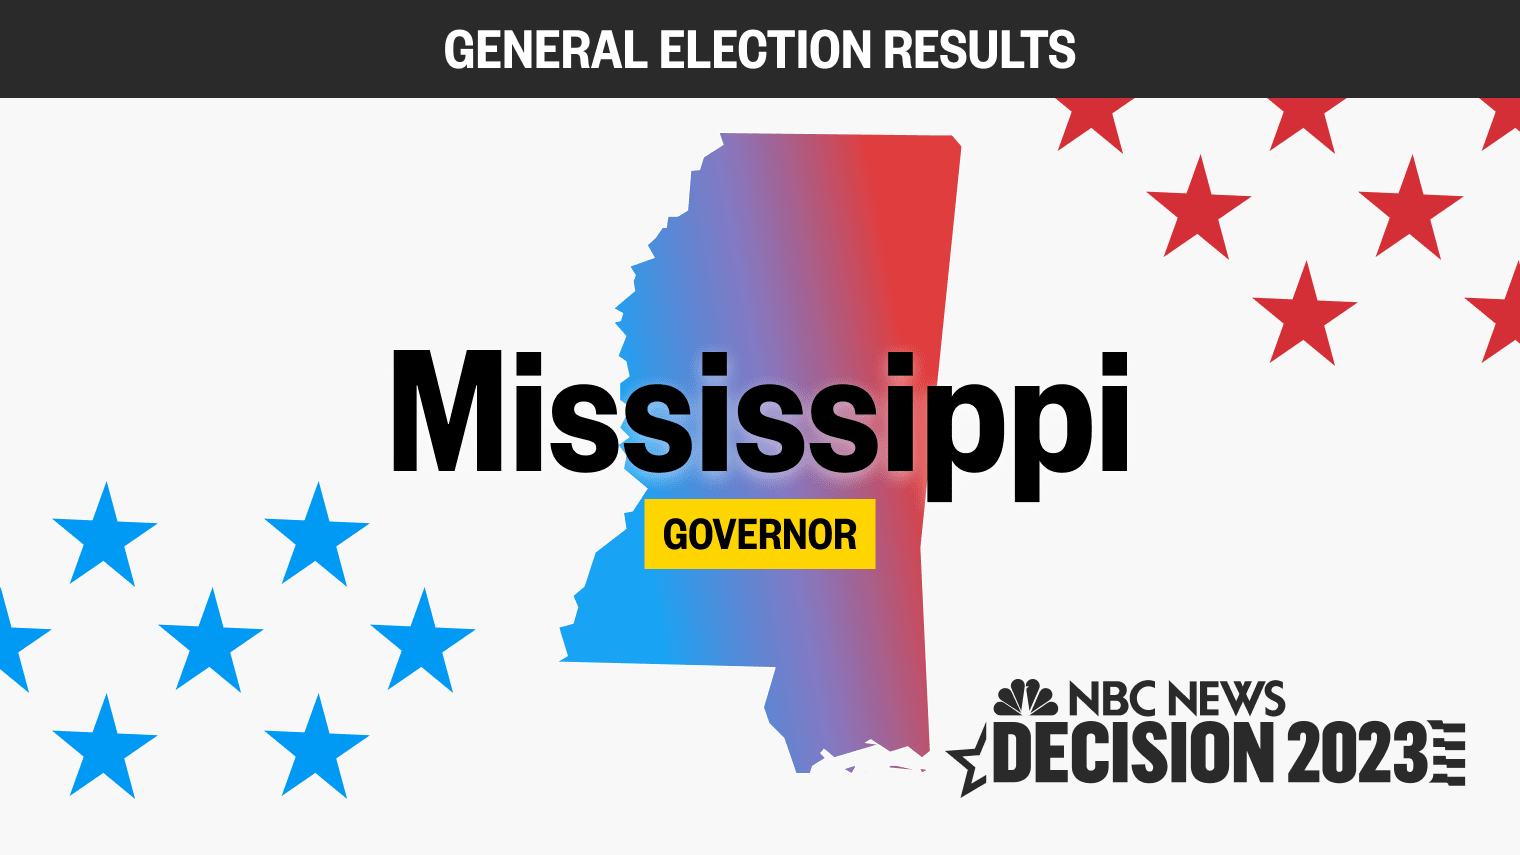 Mississippi Governor Live Election Results 2023 Tate Reeves wins